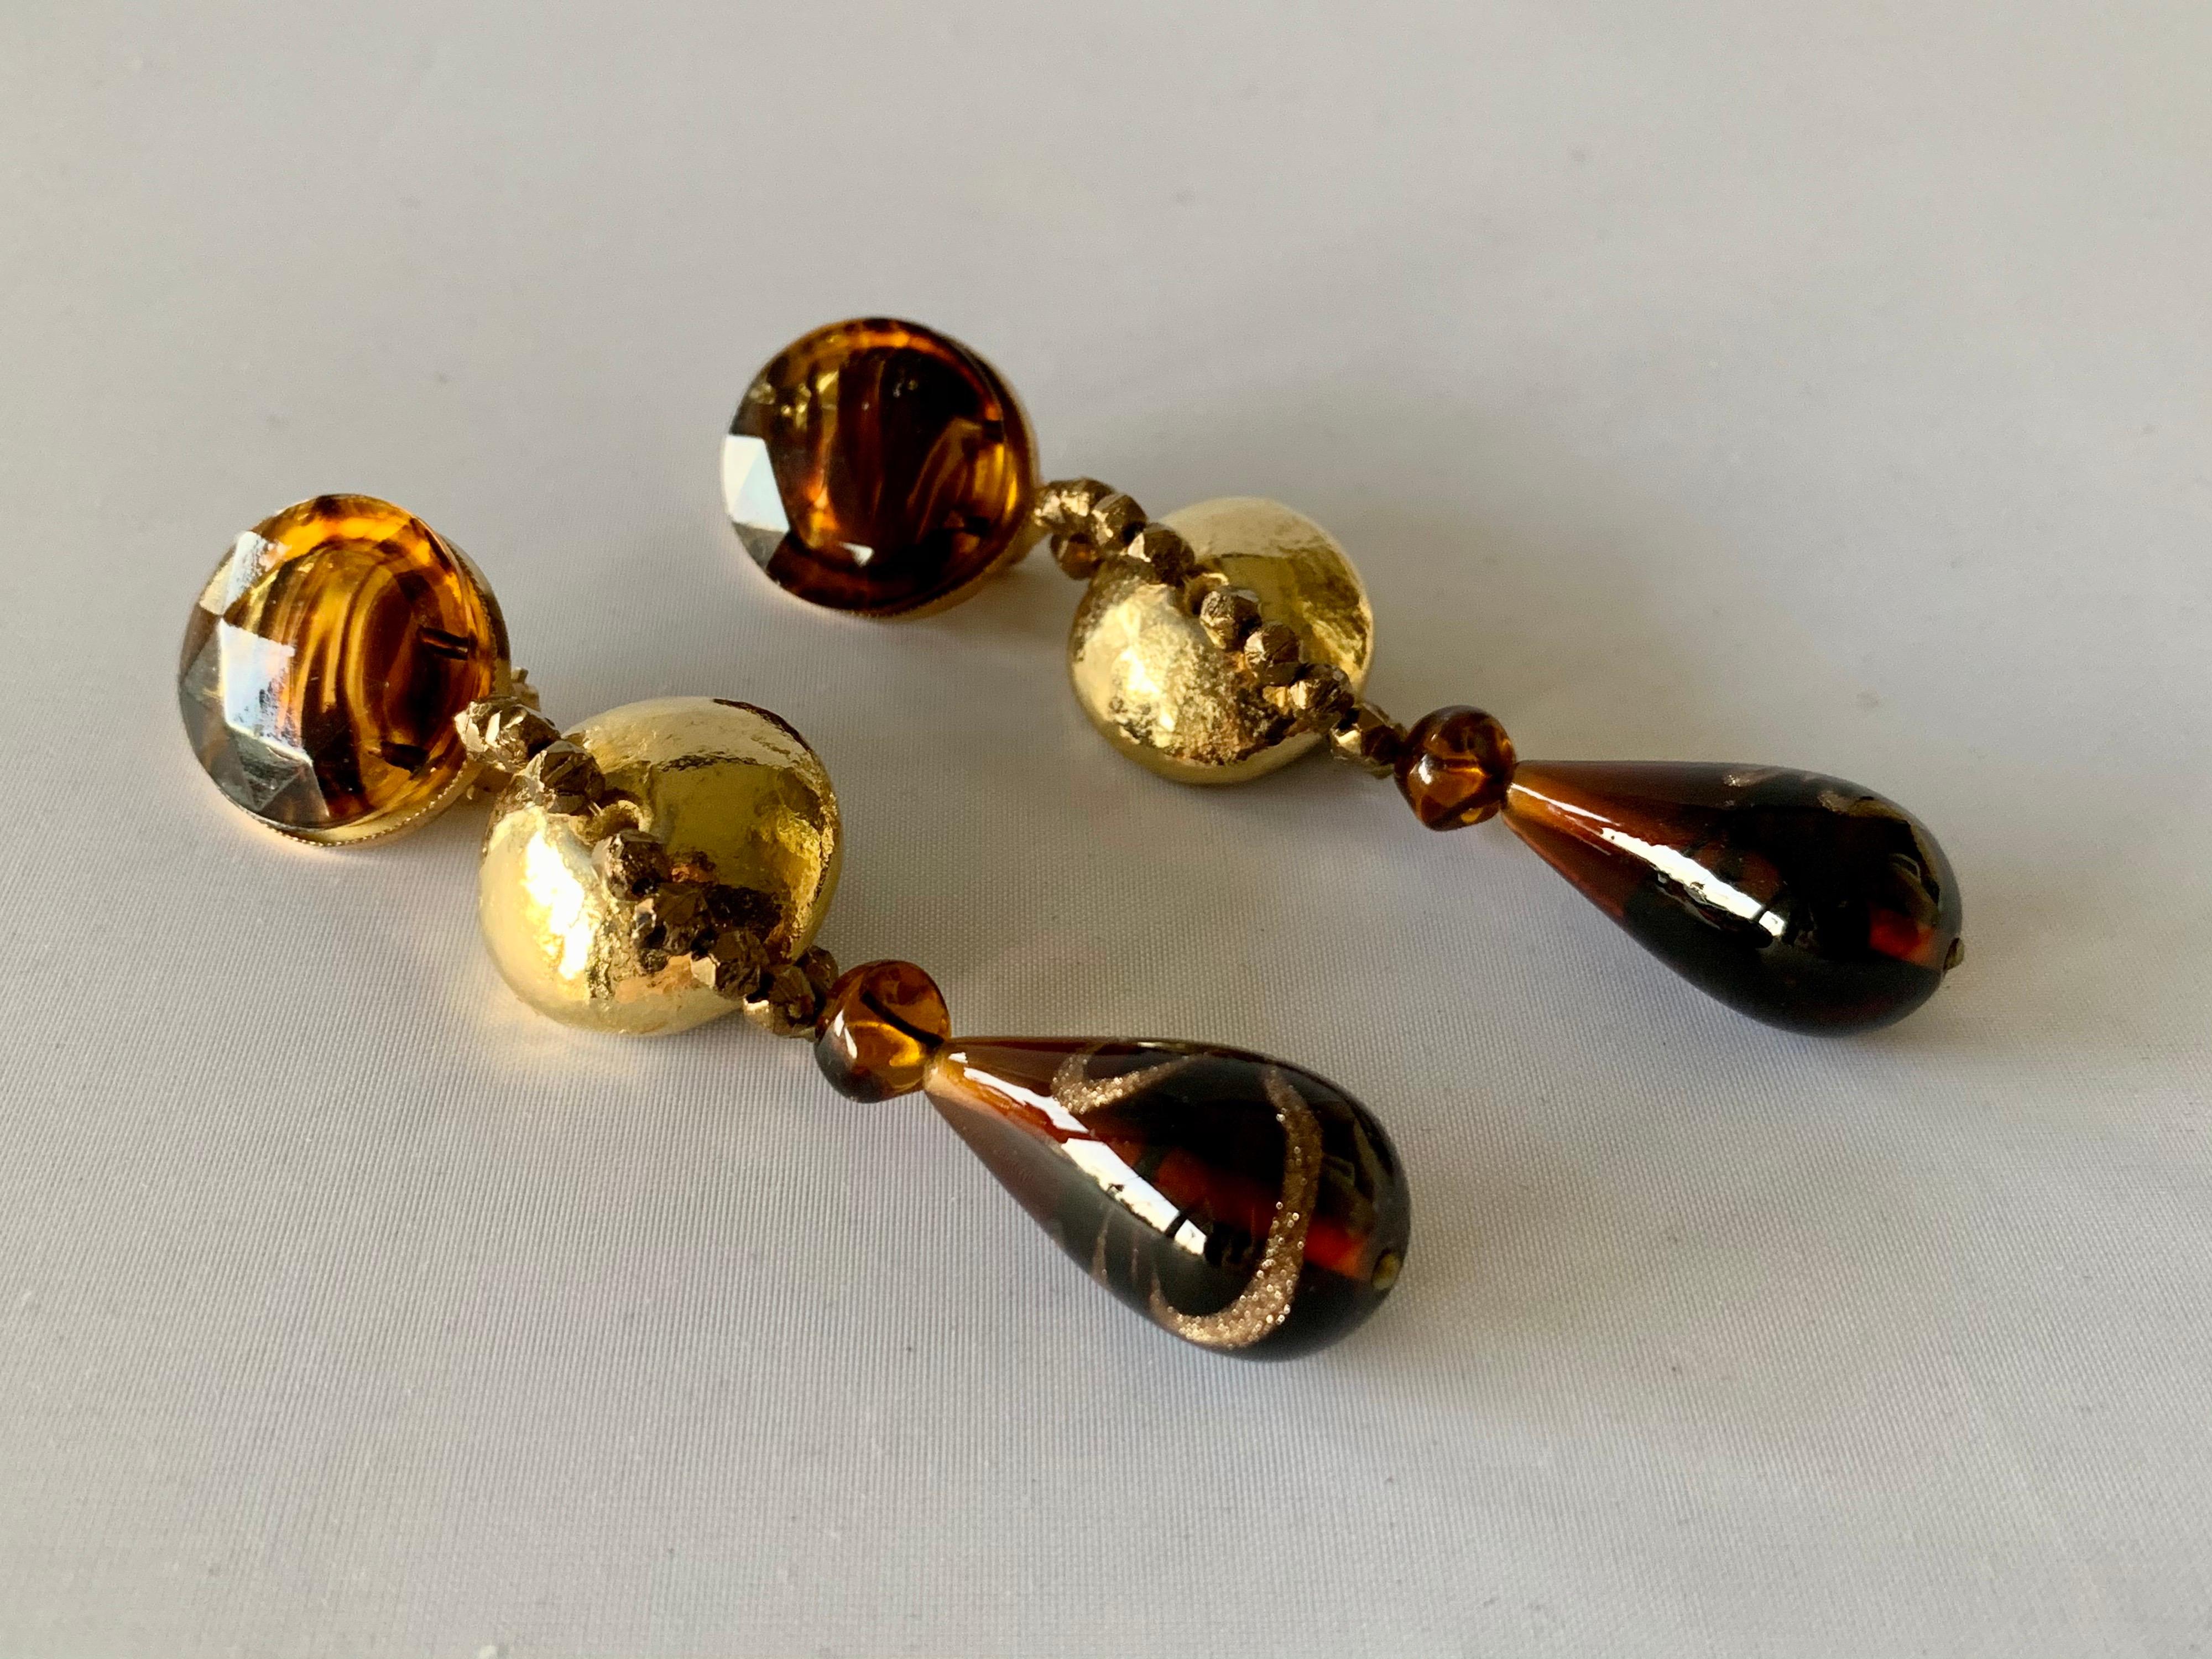 Exceptional vintage YSL chandelier statement clip-on earrings featuring a bold design - comprised out of light-brown glass segments with metallic gold details, faceted bronze beads, and large metallic gold disks at the center. The earrings are